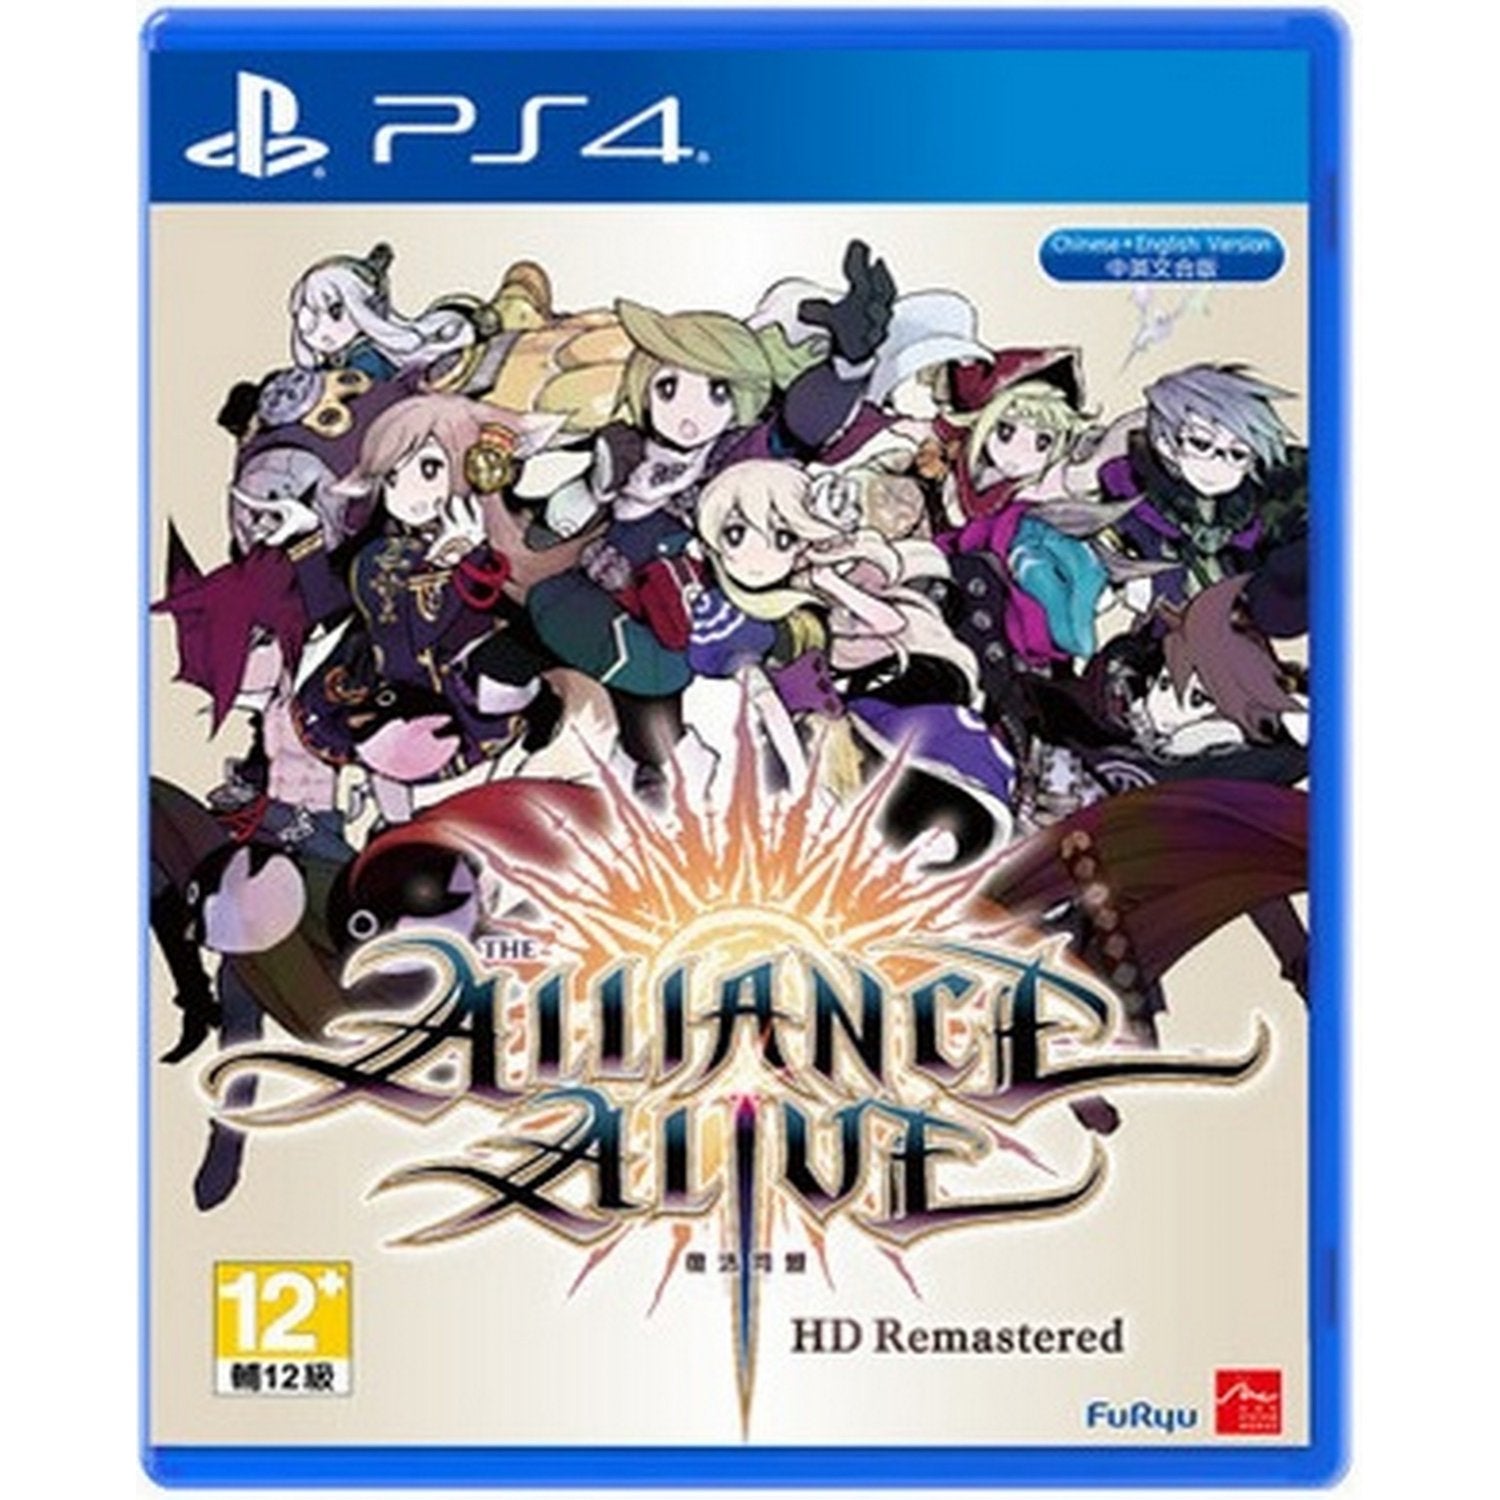 PS4 The Alliance Alive HD Remastered [English / Chinese]